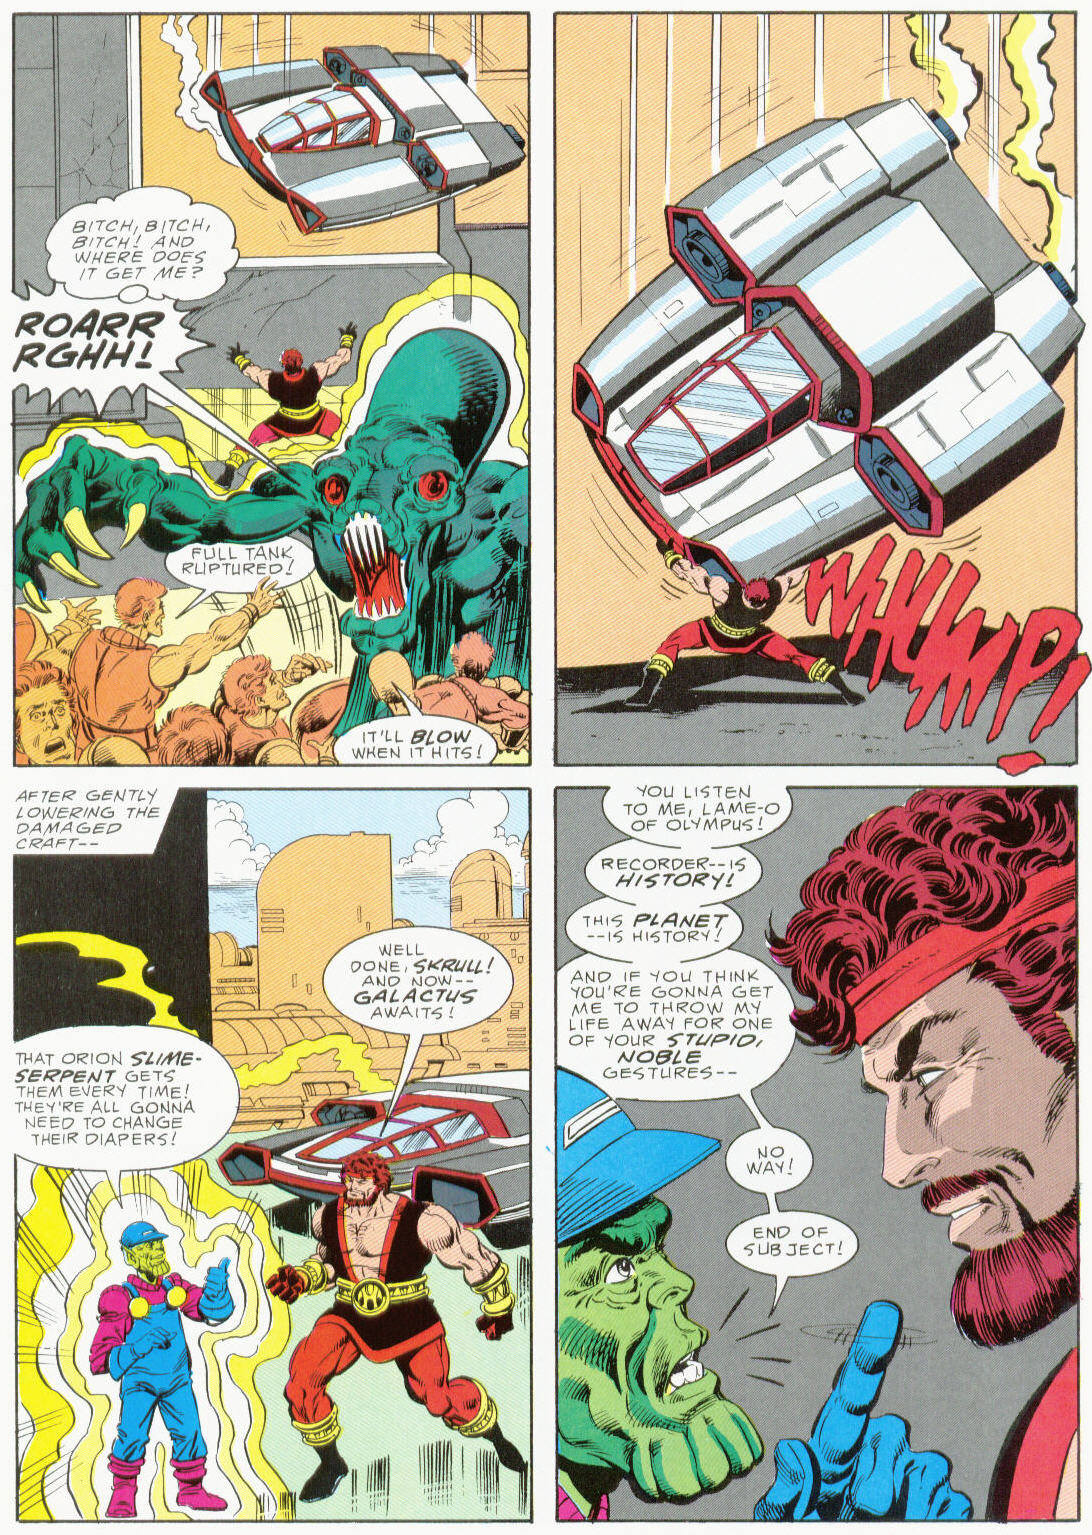 Marvel Graphic Novel issue 37 - Hercules Prince of Power - Full Circle - Page 23